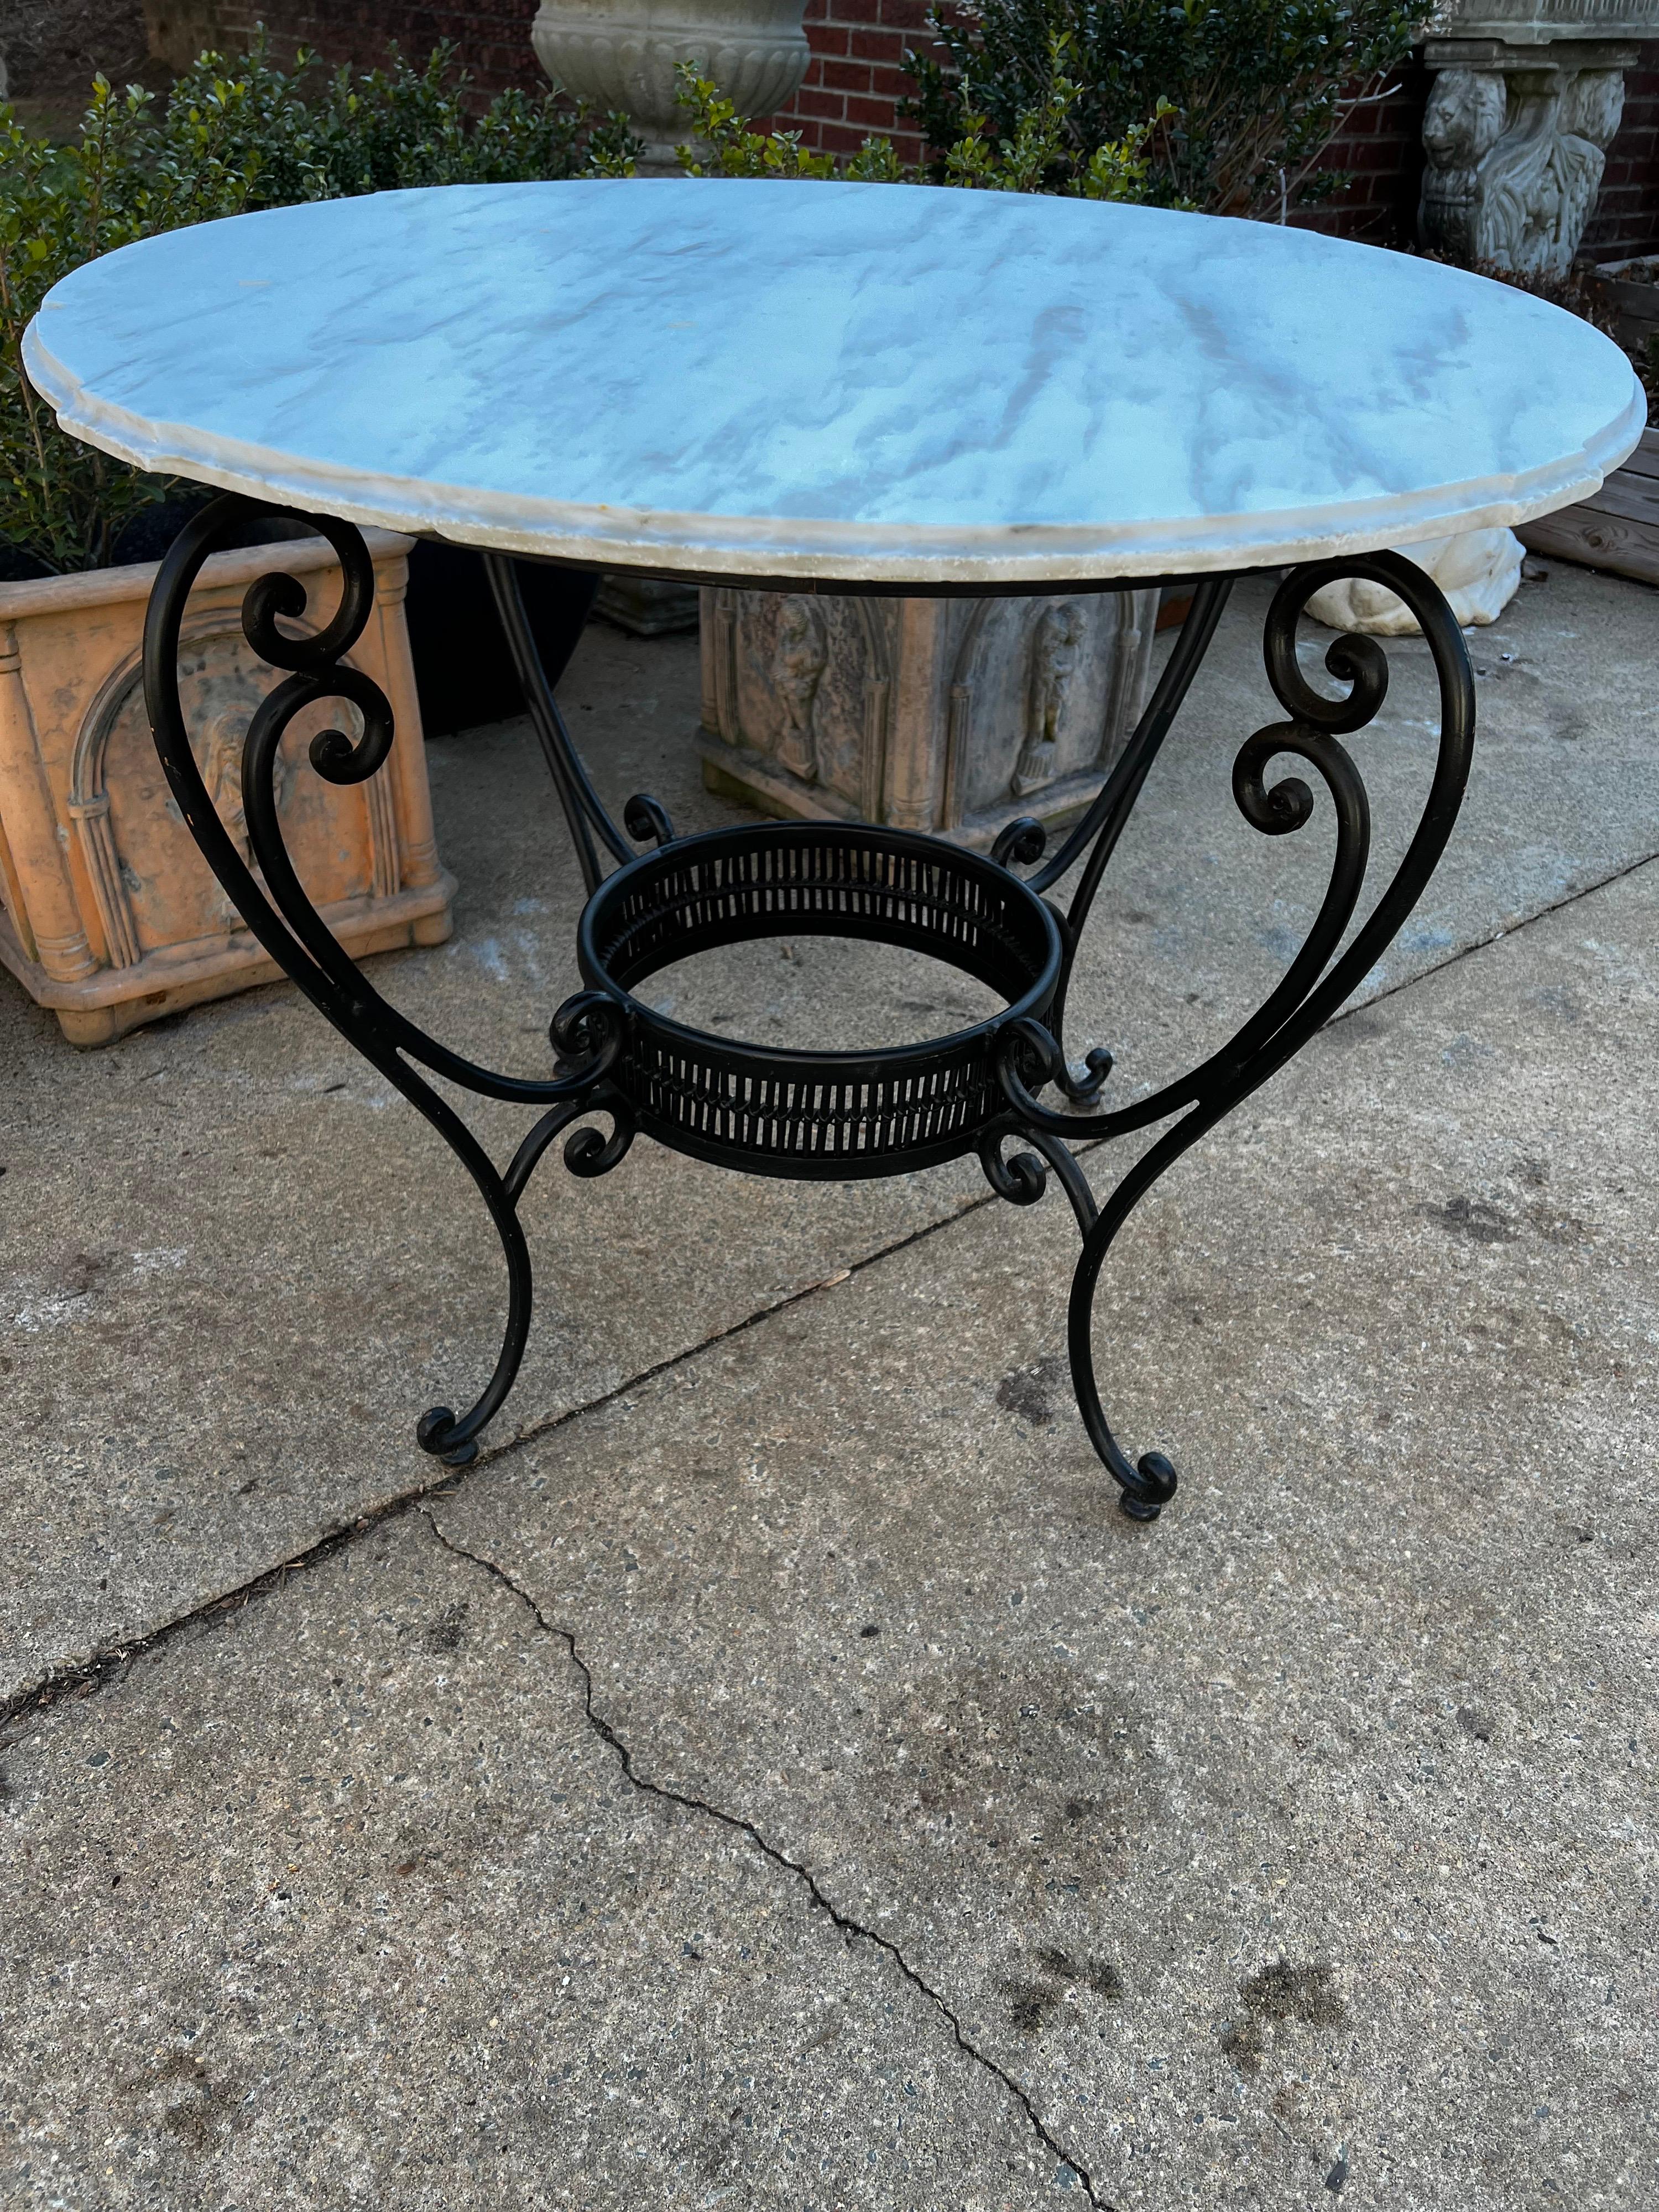 Ebony color metal table base with Italian Marble top. 
The metal ring on the bottom is lined with a bamboo type wood also in ebony finish.
This would make wonderful entry foyer, center hall table. Garden table, garden dining table, patio or porch